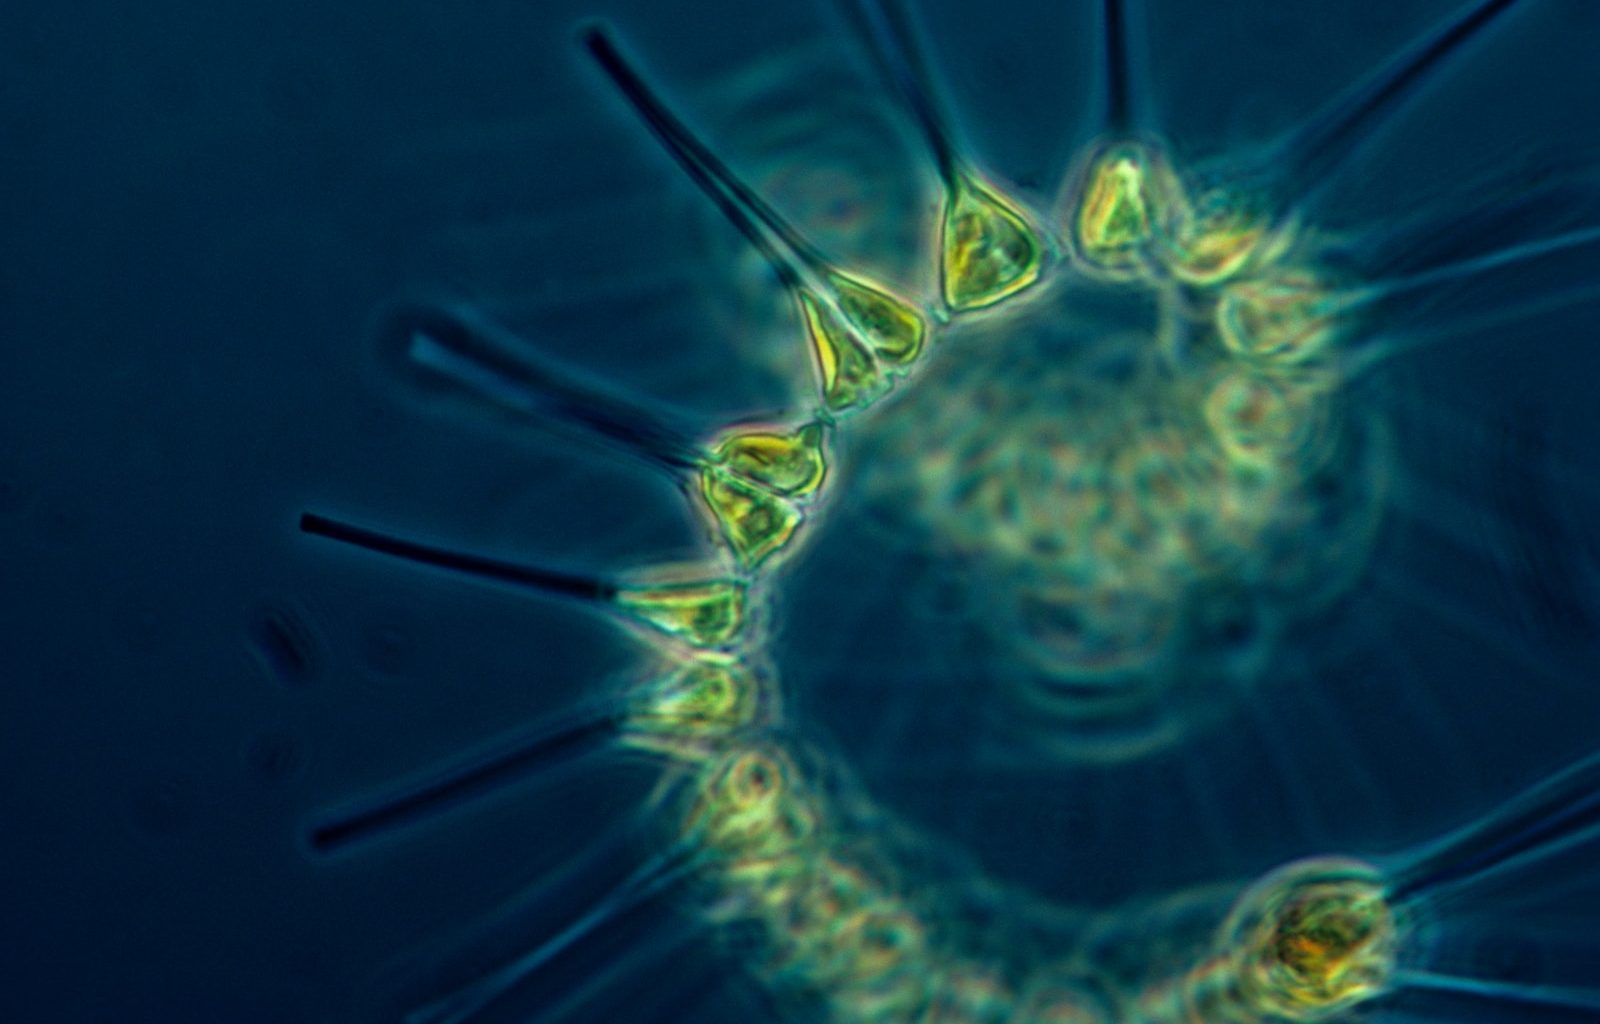 Phytoplankton - the foundation of the oceanic food chain.